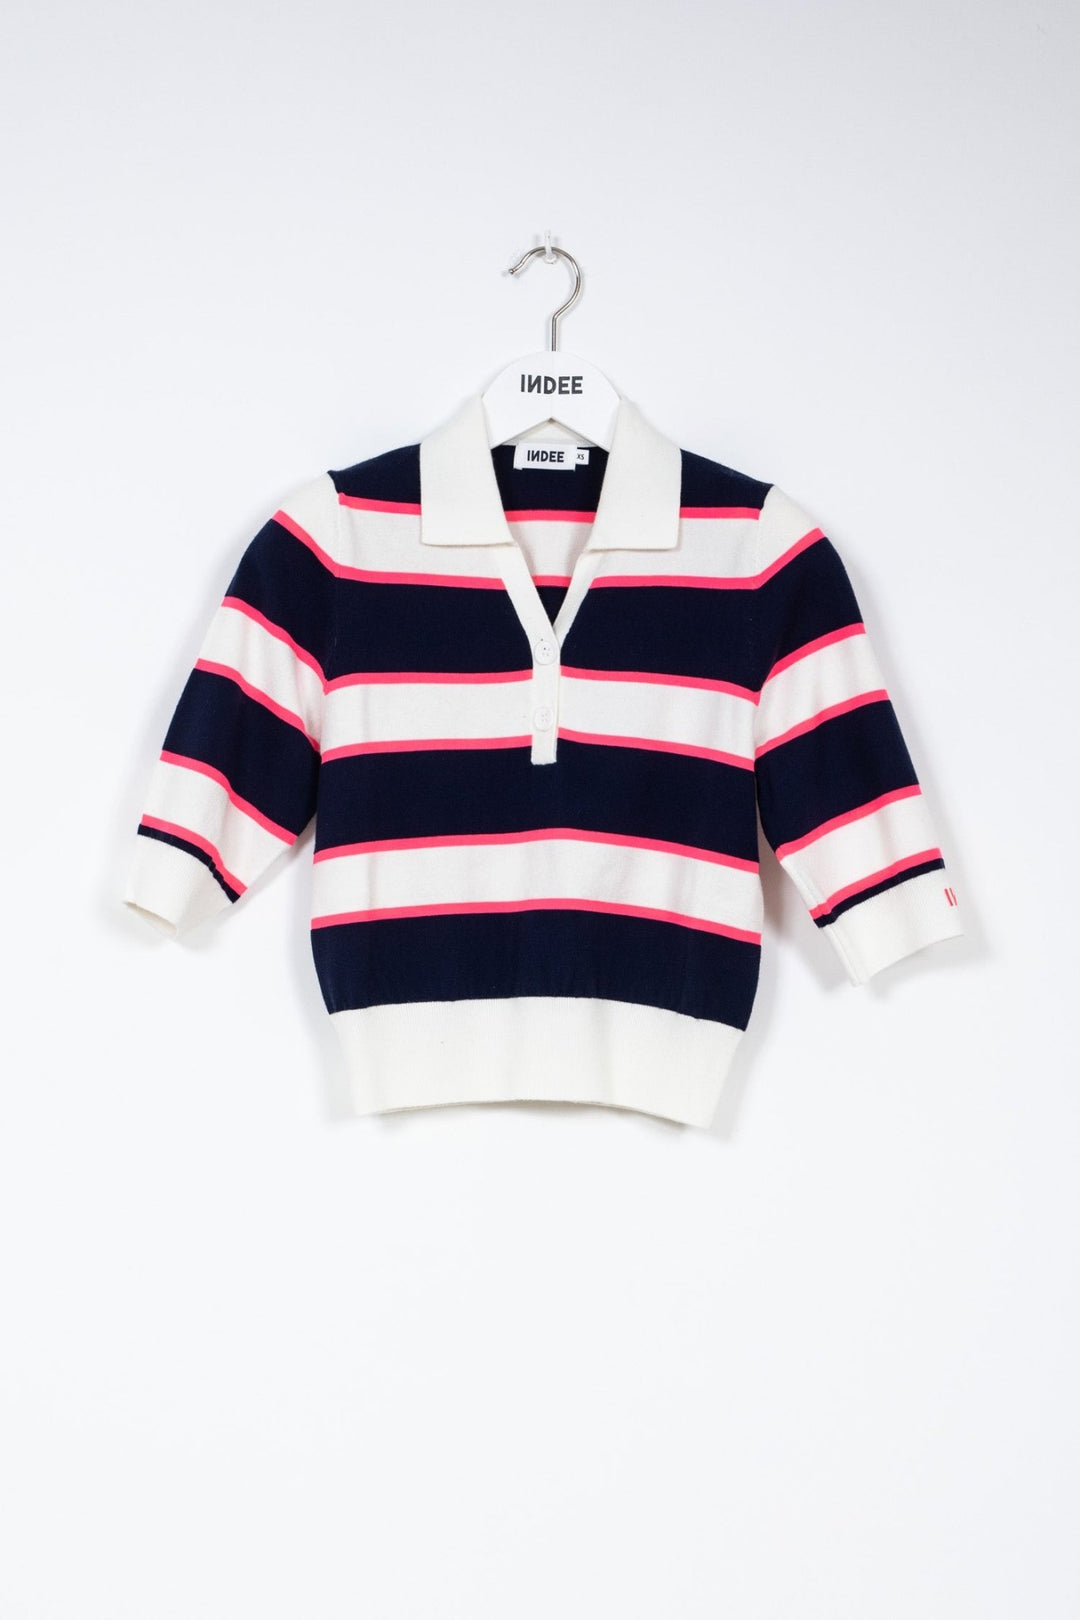 Light Weighted Knitted Polo - Marine Blue - Posh New York